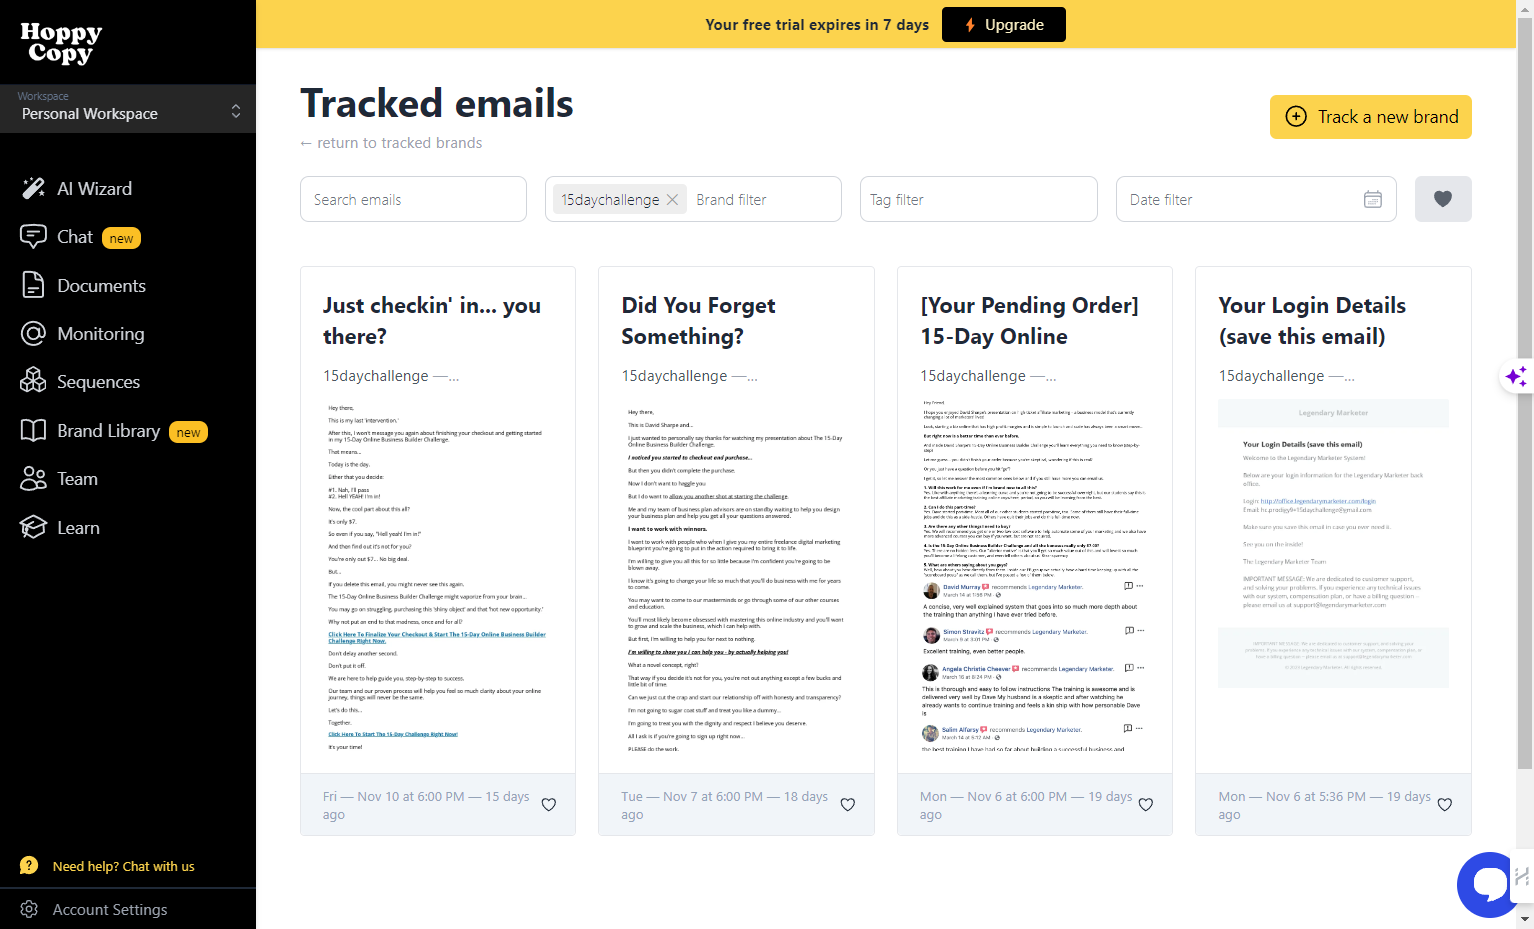 Other Brand Email Monitoring Dashboard